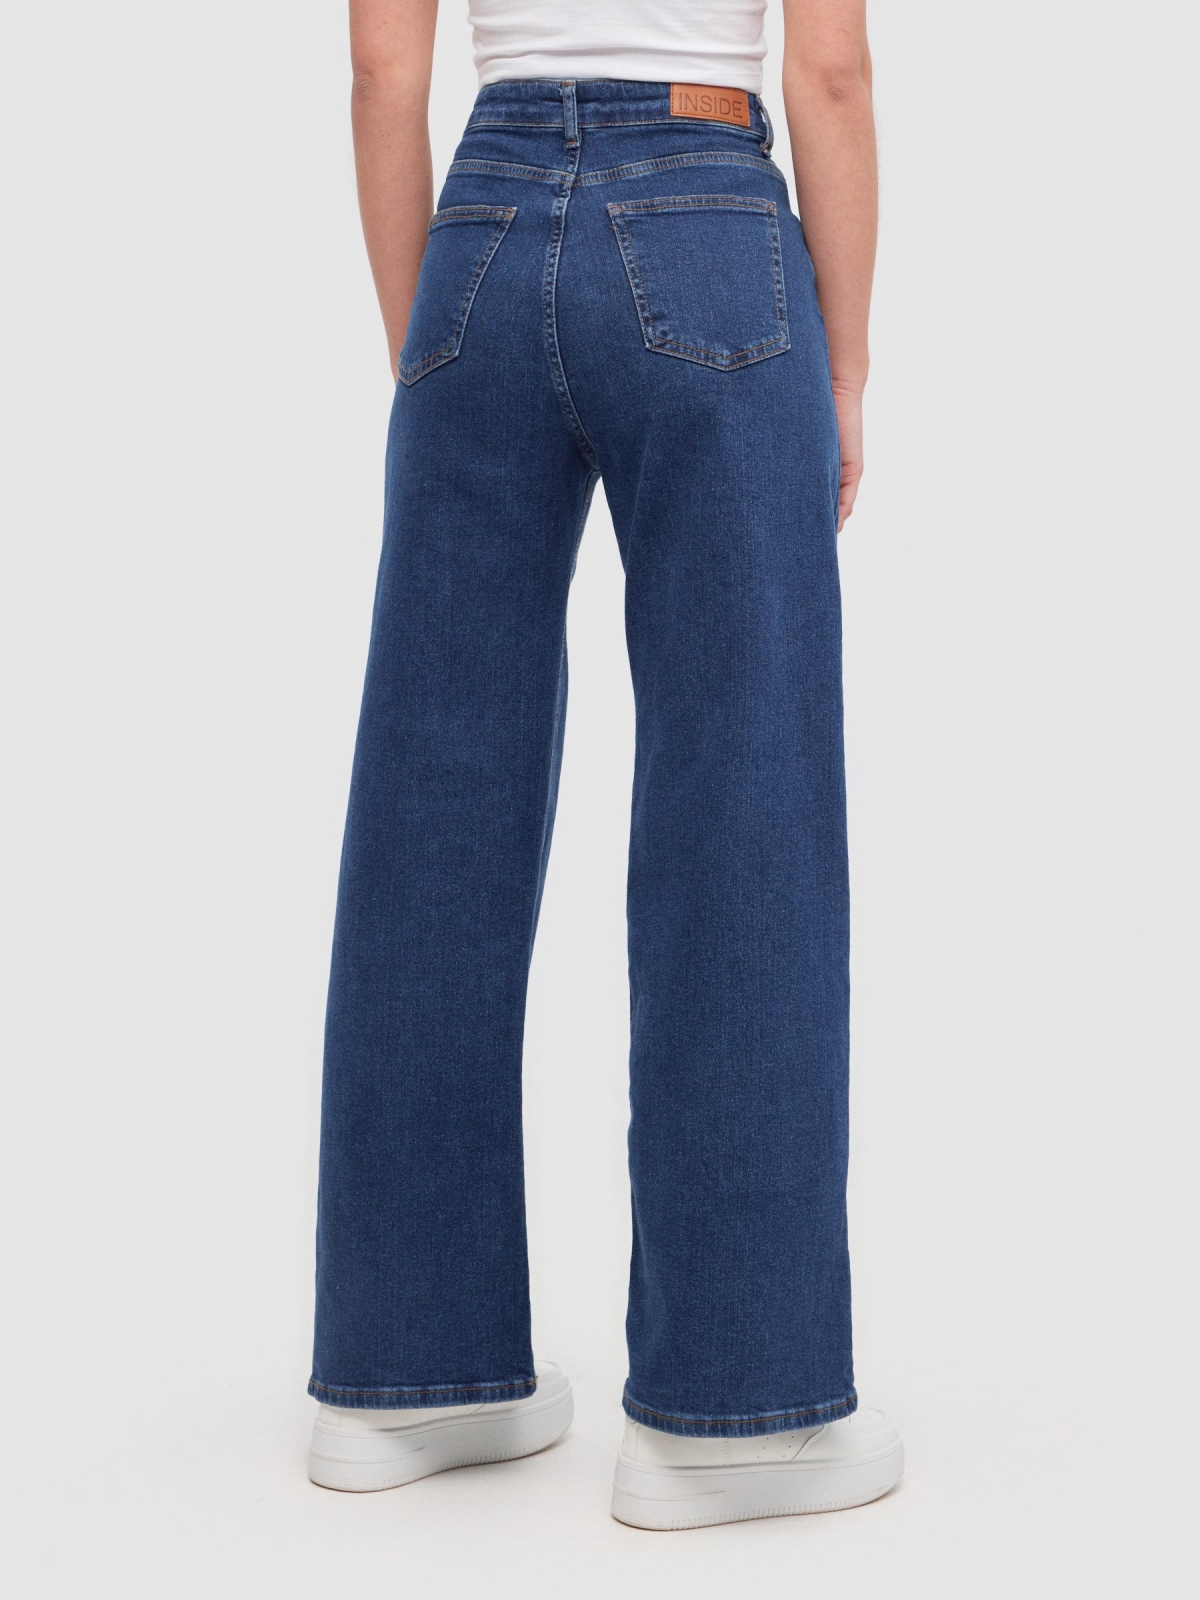 Wide leg jeans dark blue middle back view